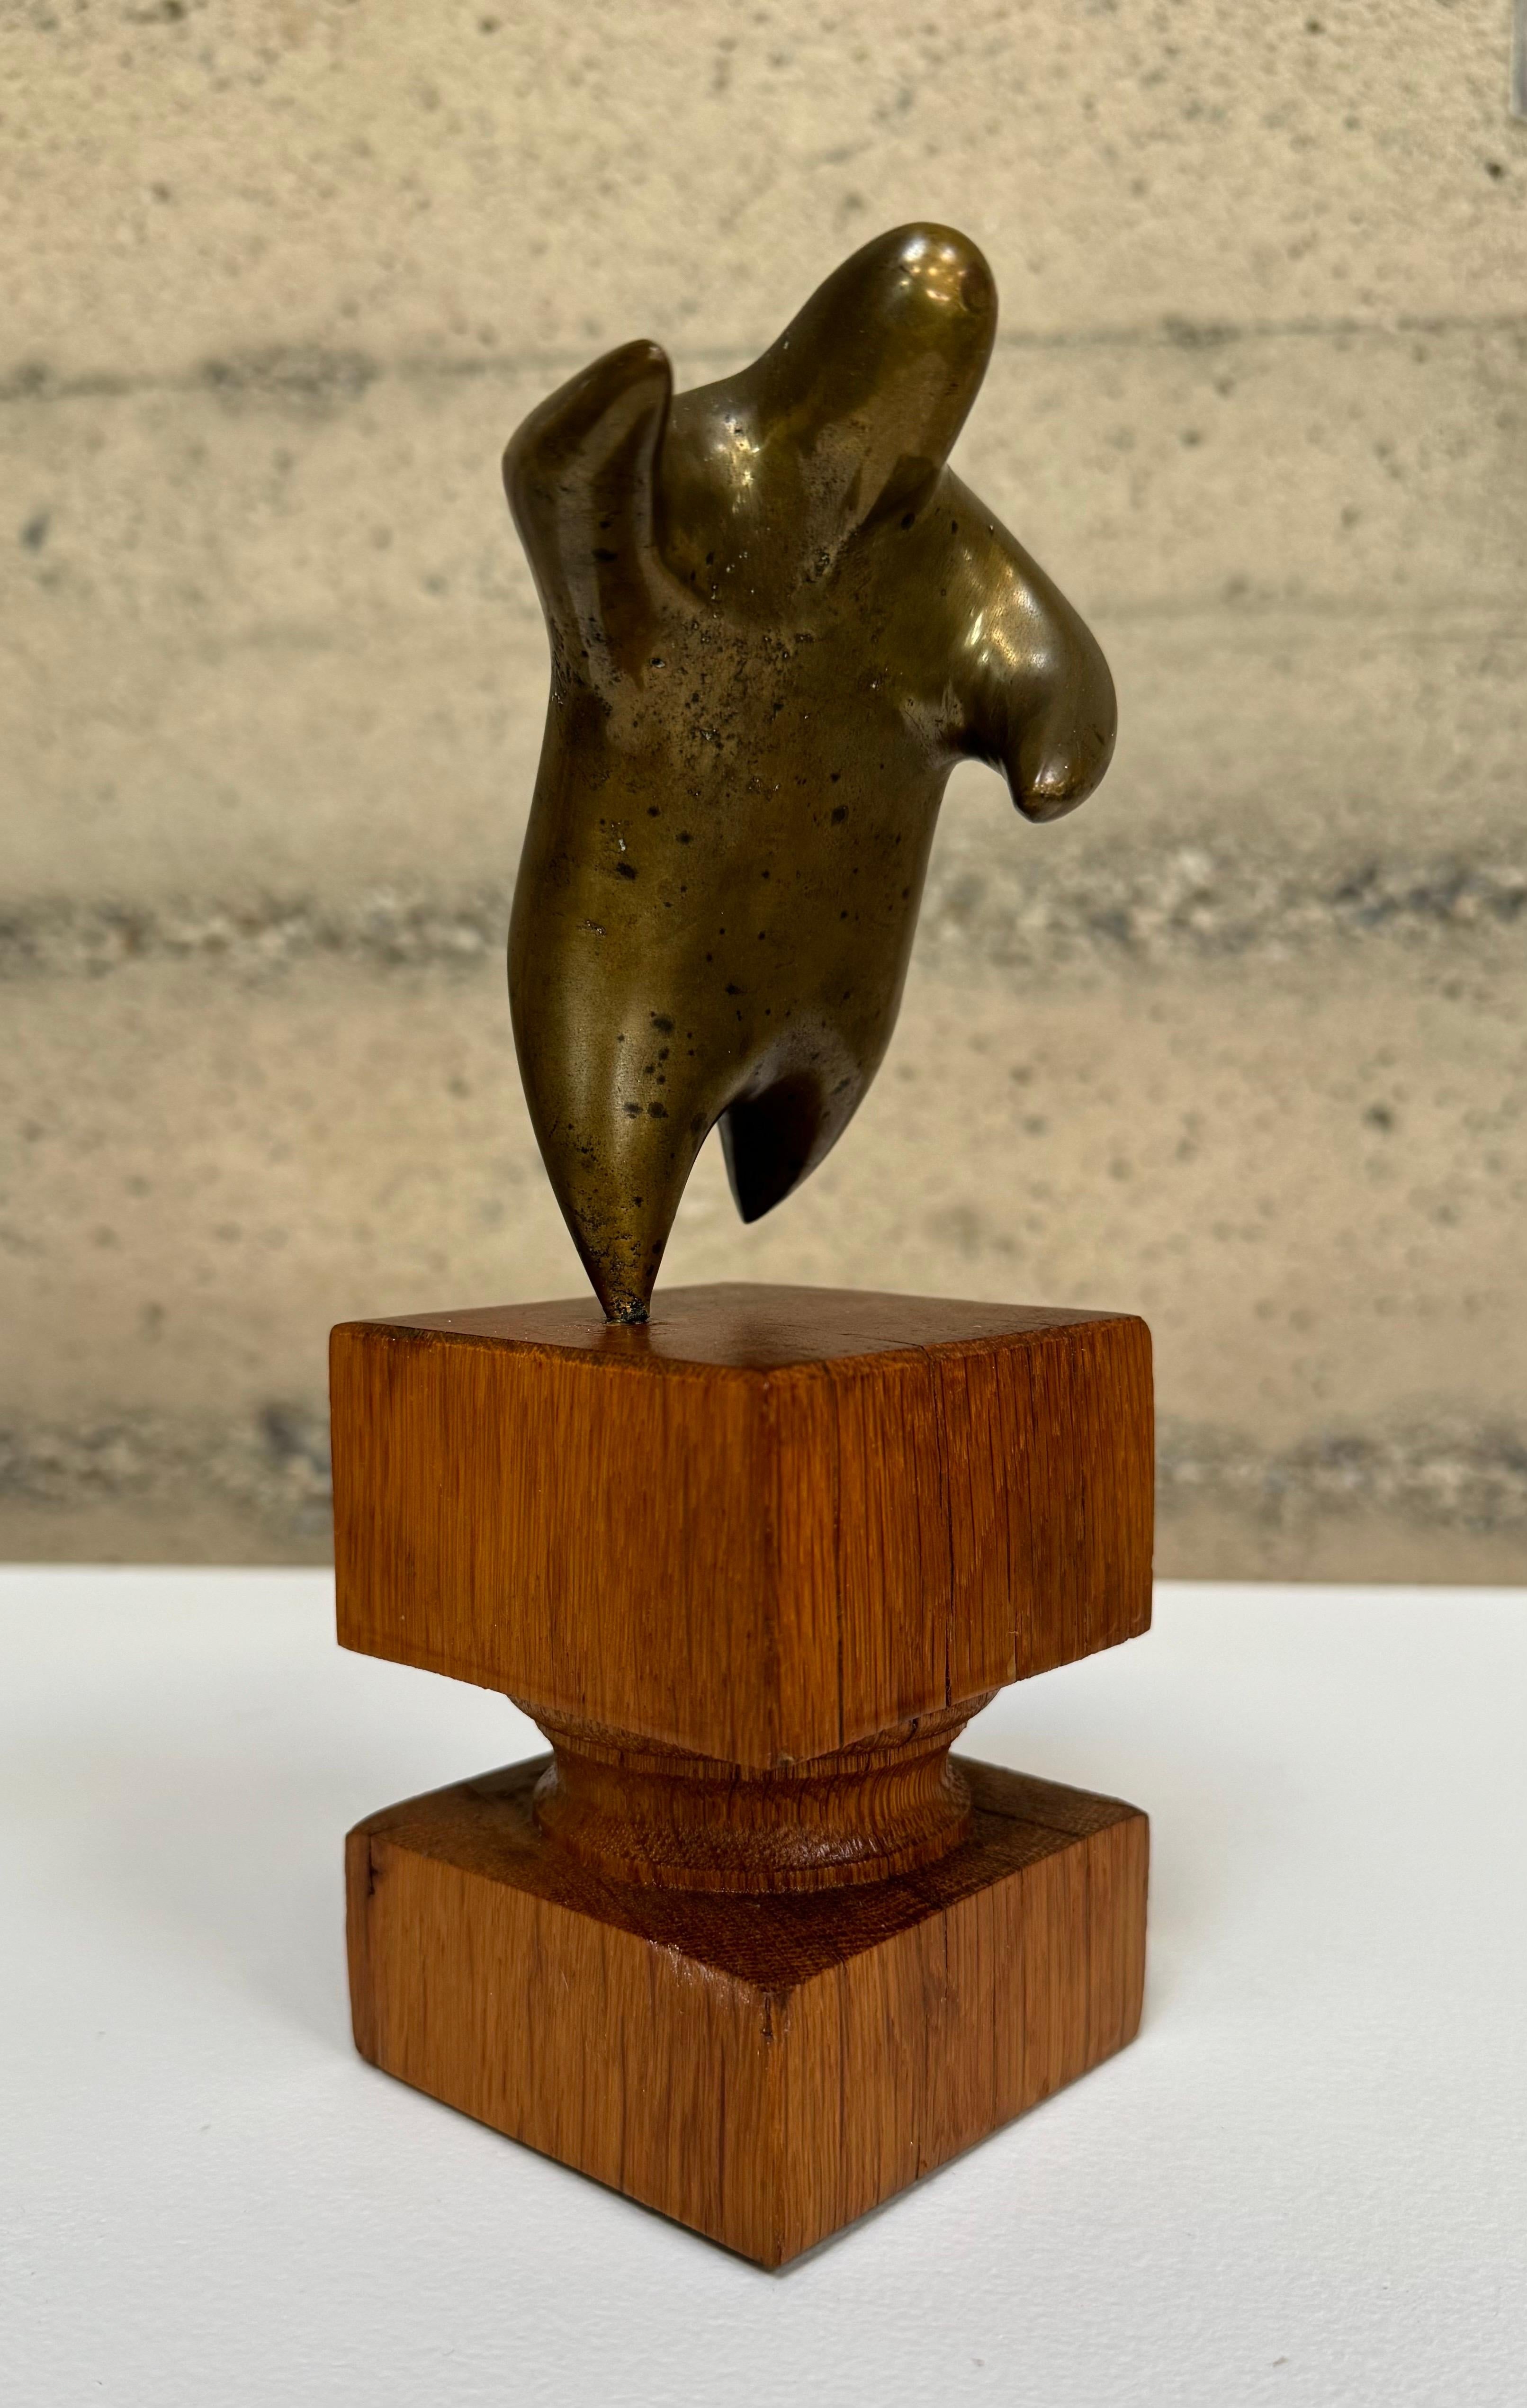 Figurative abstract sculpture in bronze on a hardwood base. A whimsical form from the estate of Warren Davis, who was the owner of the Vintage Antique Bank in Petaluma, California. Warren was know for his wide ranging interests in the art world and